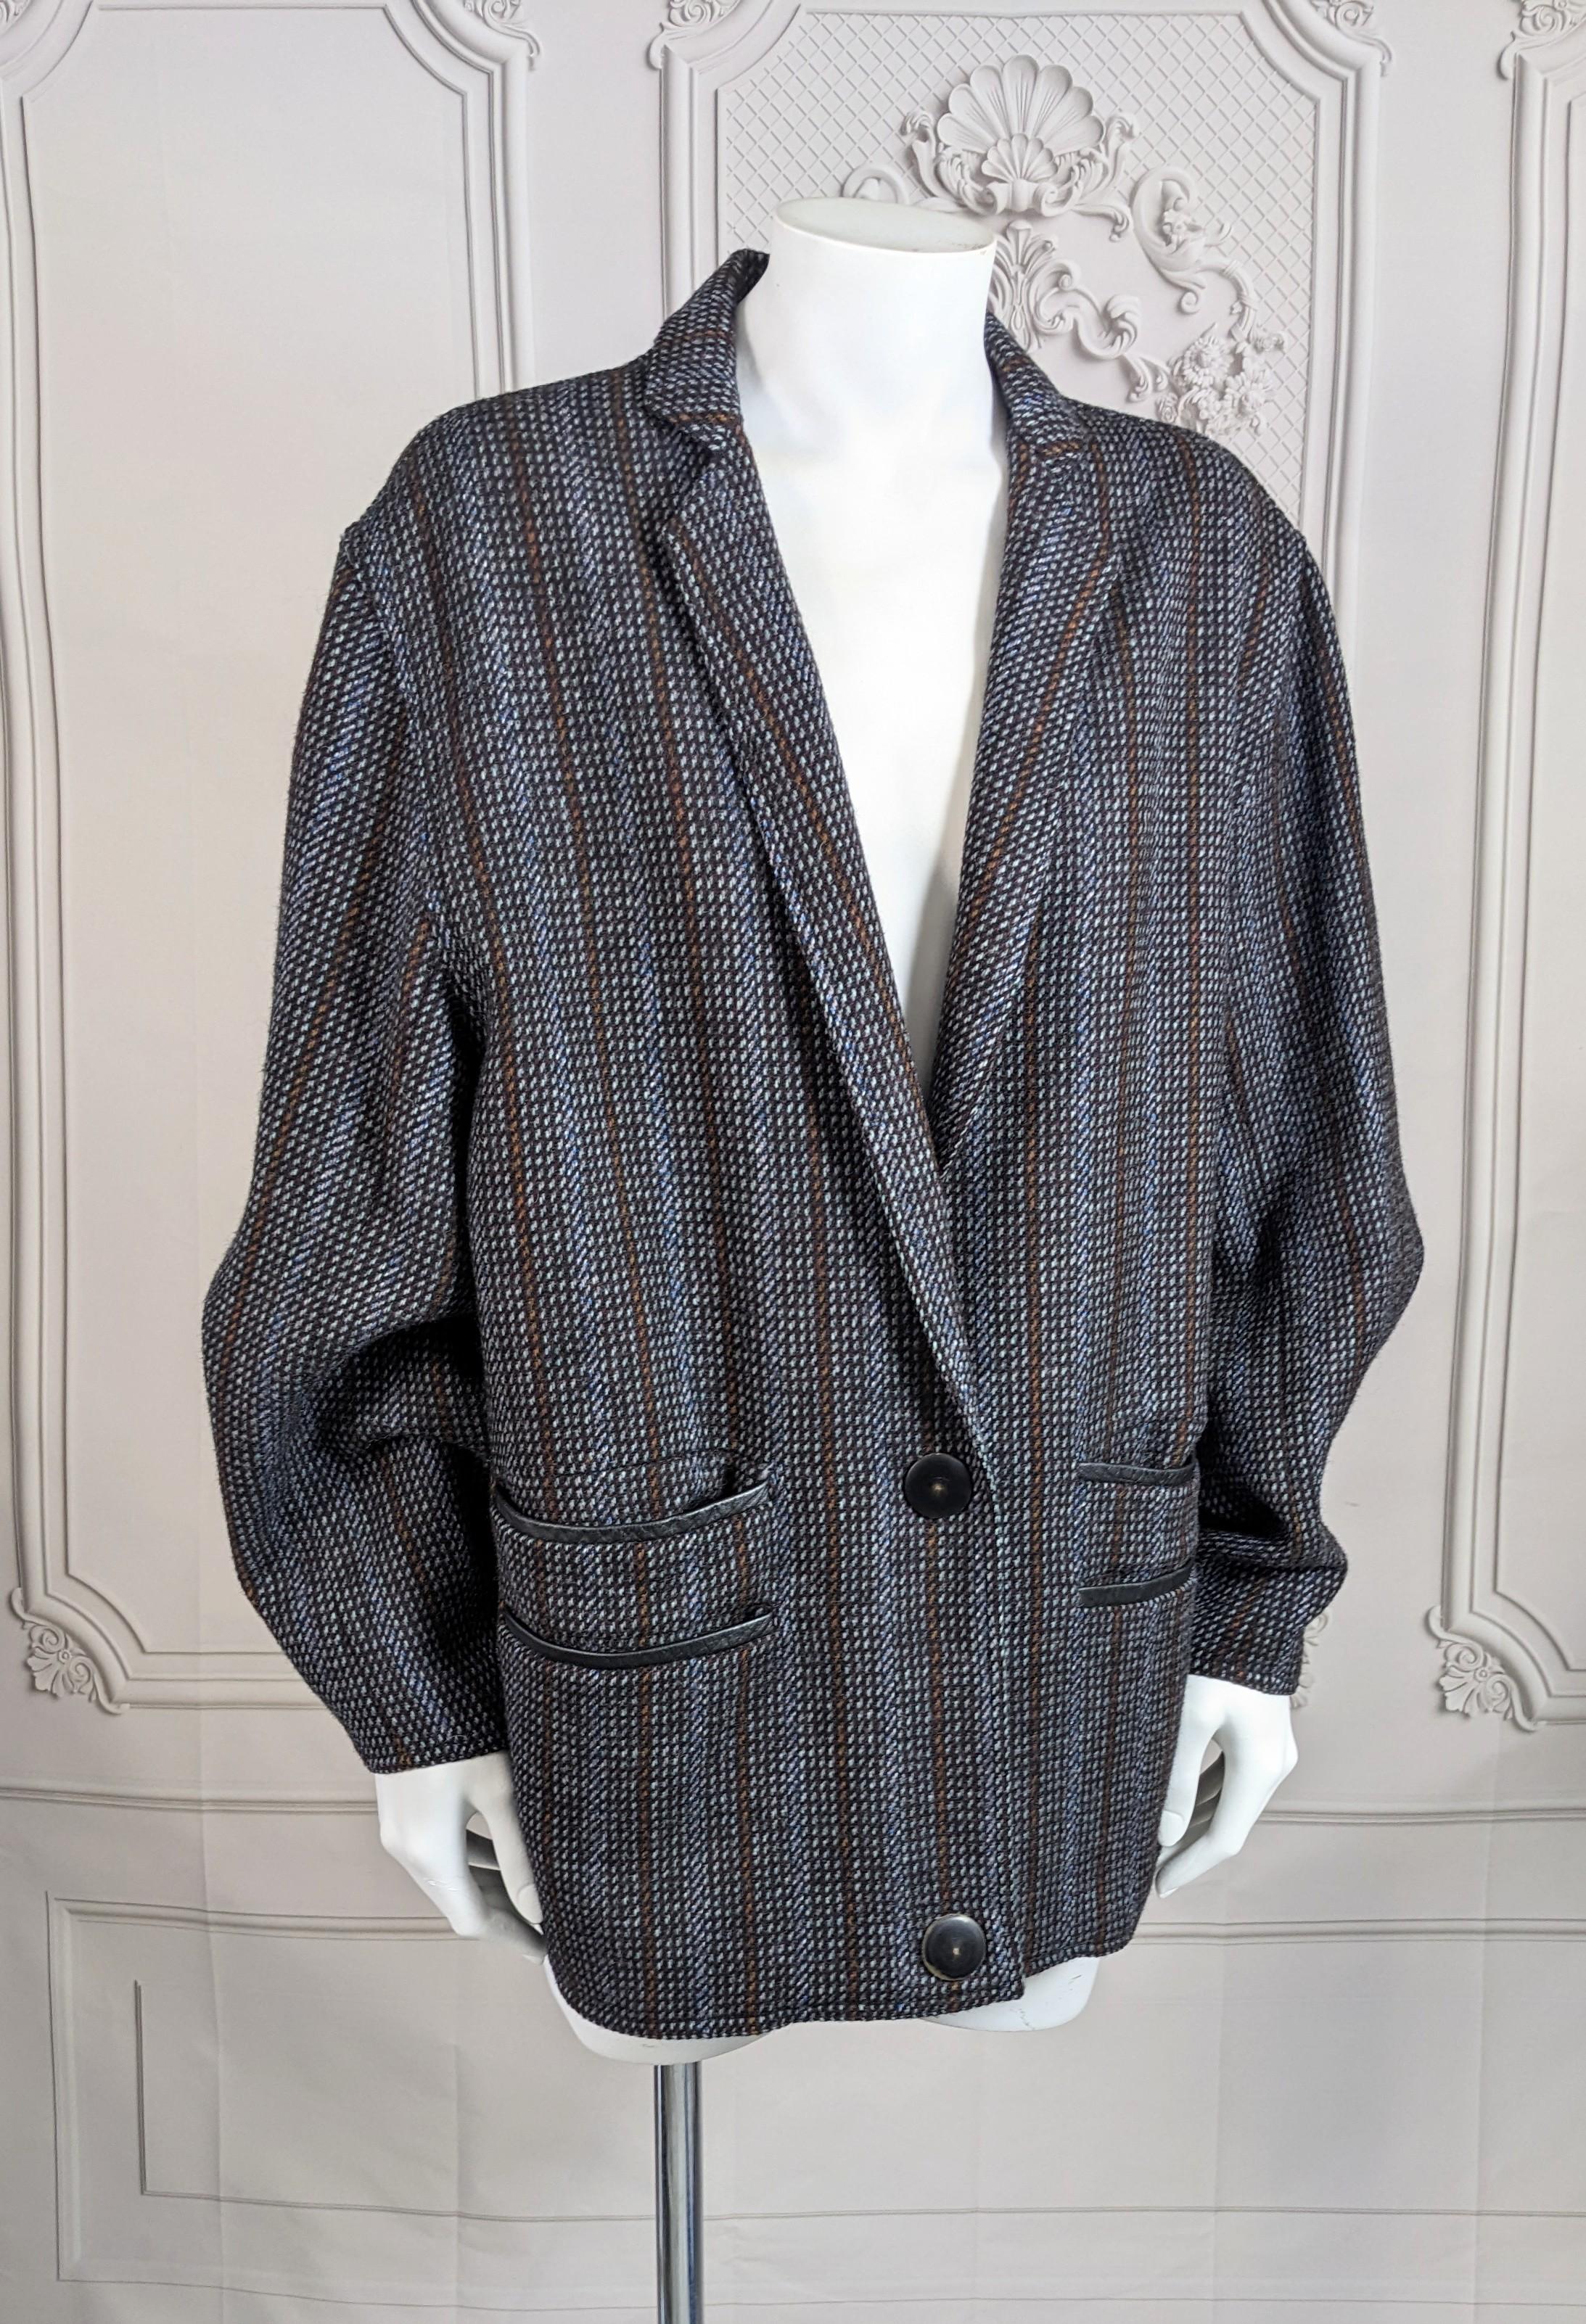 Iconic design by Anne Marie Beretta from the mid 1980's. Sculpted Tweed Jacket with signature angle sleeves and faux horn snap closure. Straight boxy cut with 2 sets of leather trimmed pockets. Fully lined. 
1980's France. 
Length 28